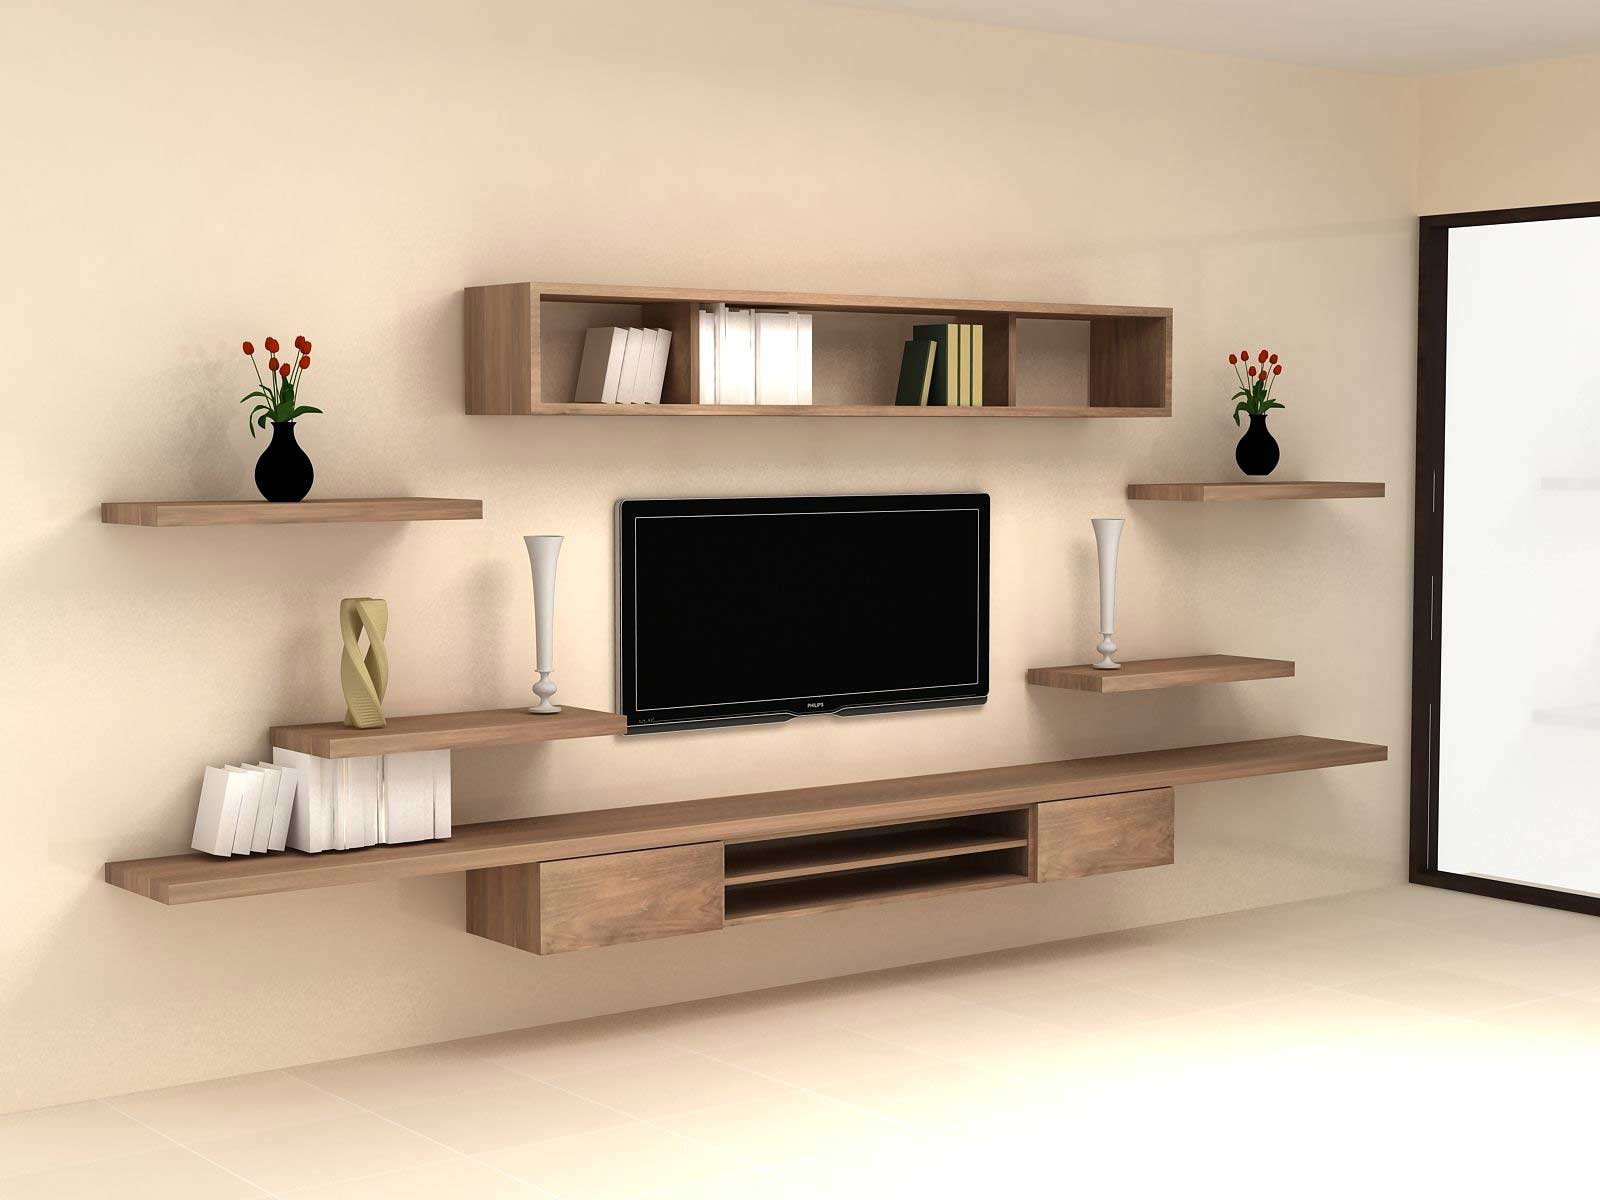 a free standing tv unit with angular titanic fittings installed for shelves and cabinets